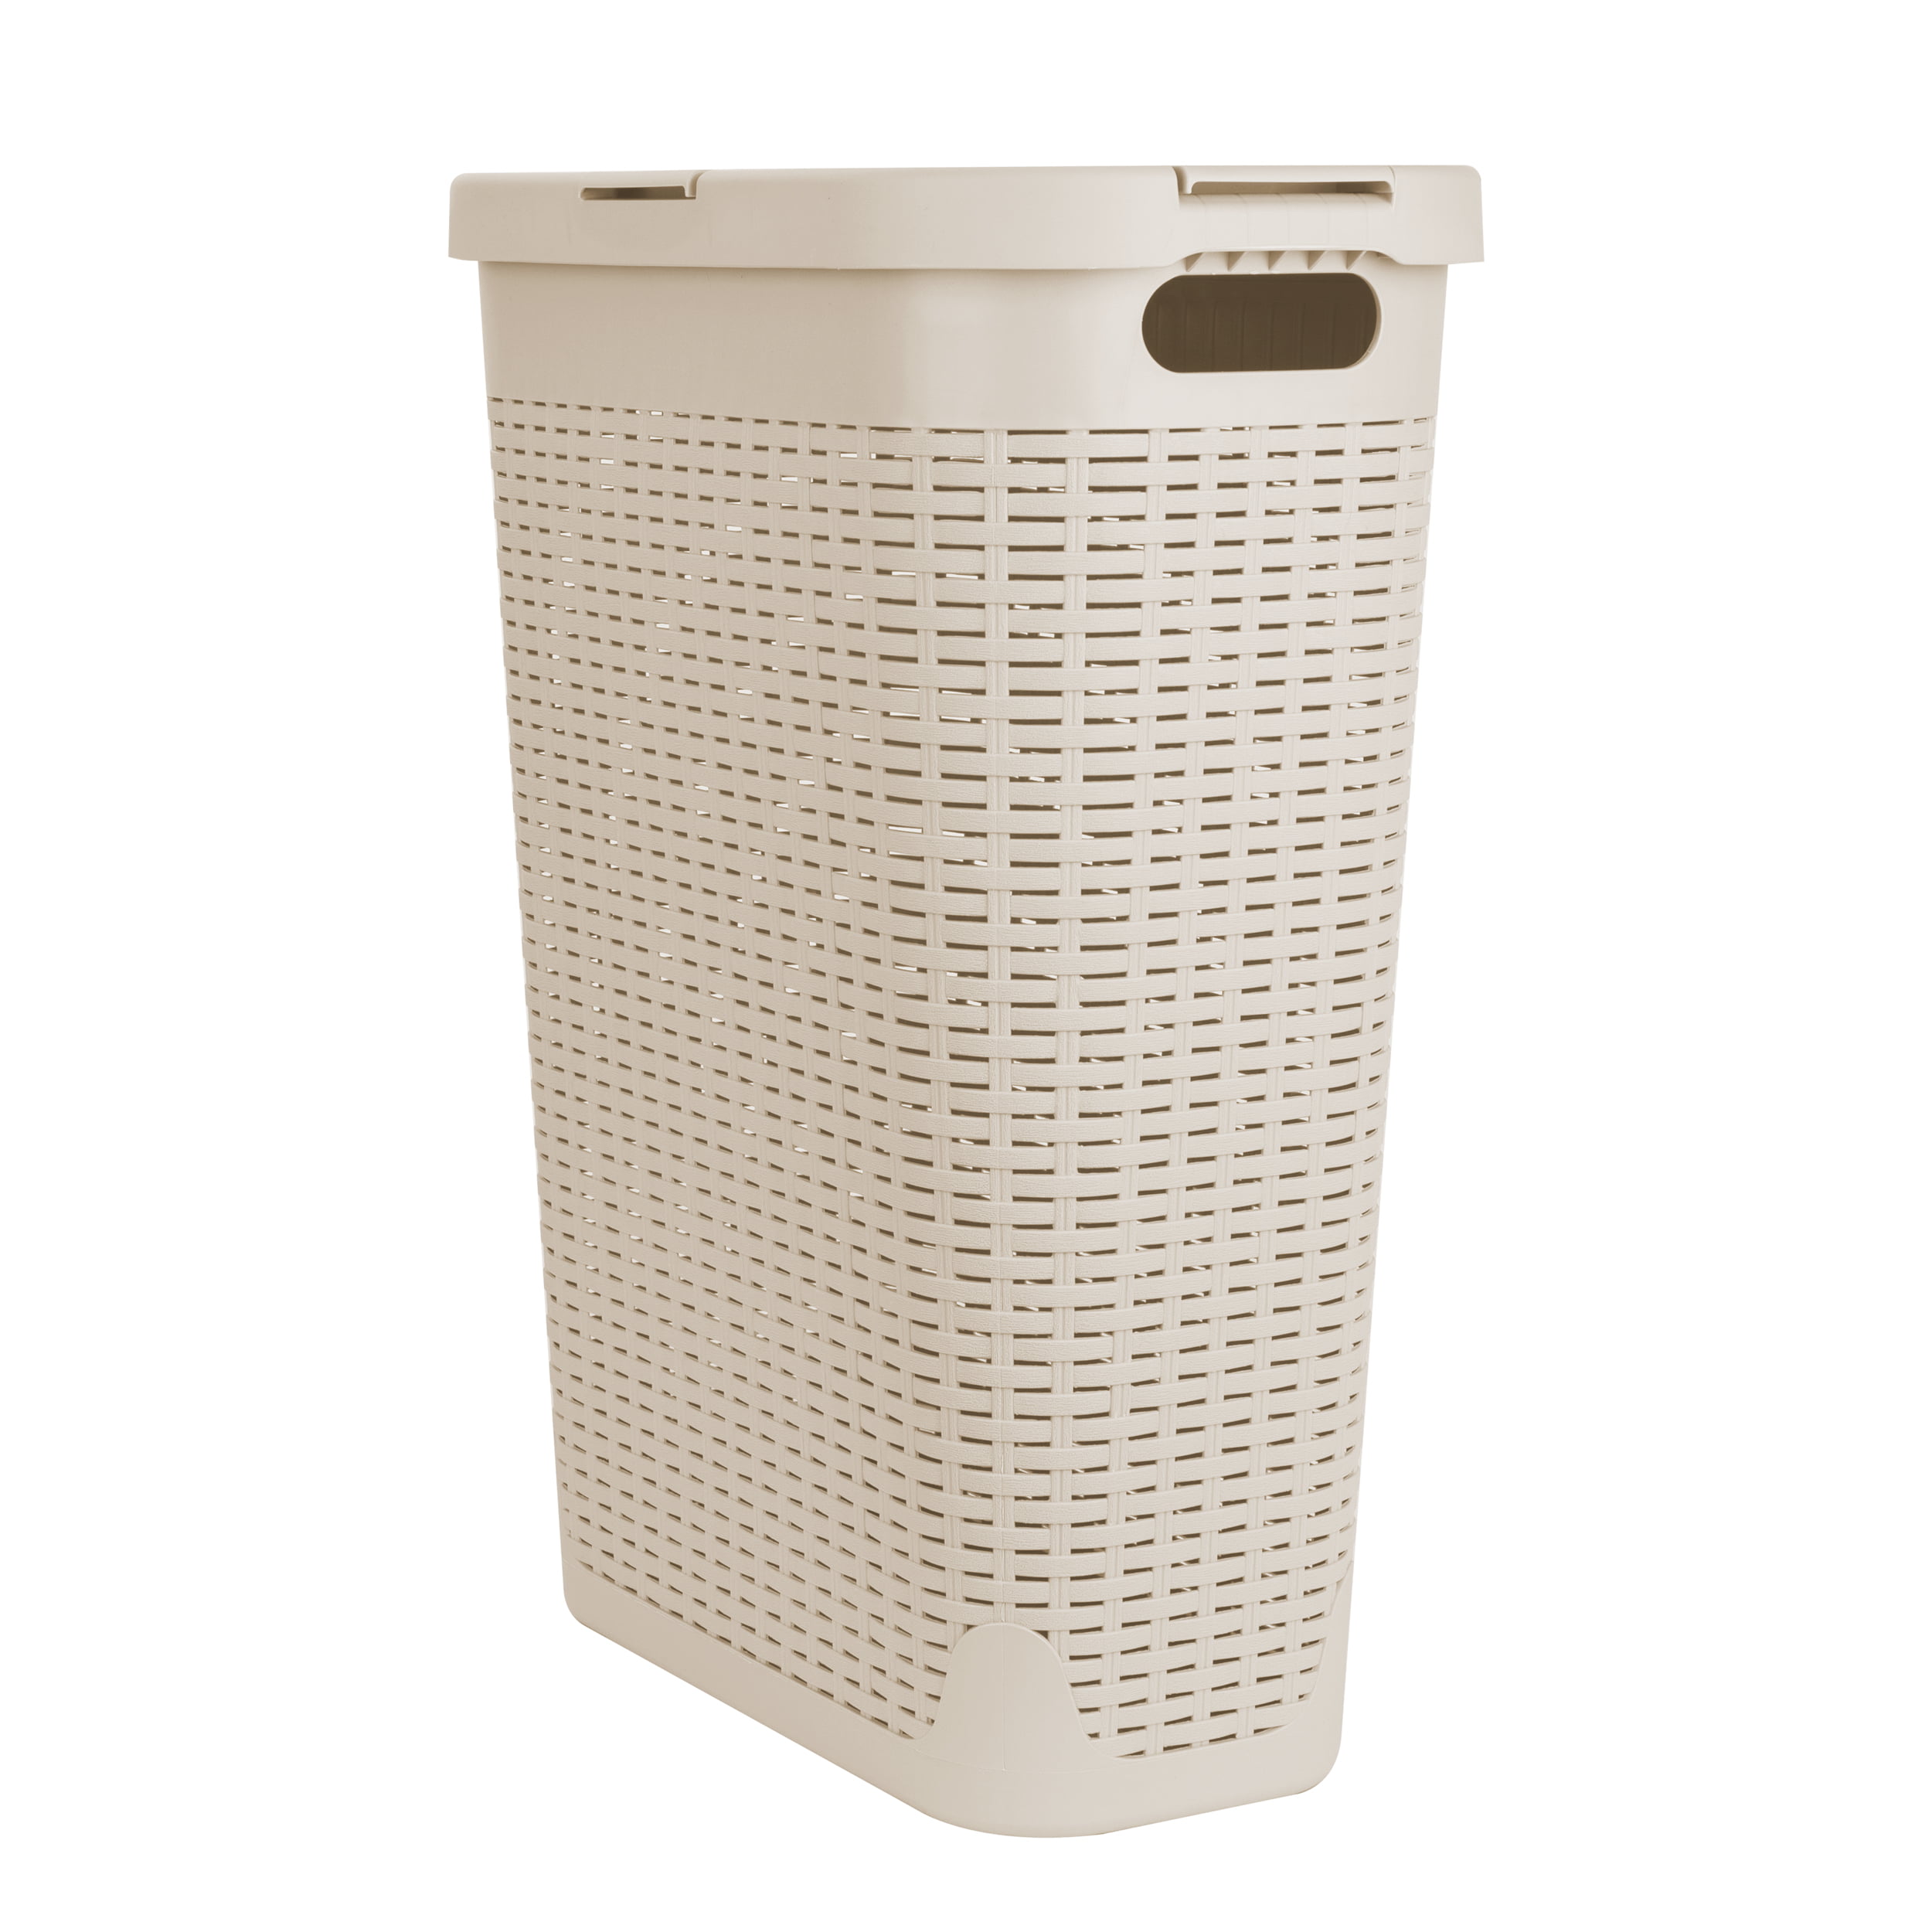 NEW PLASTIC LAUNDRY WASHING CLOTHES STORAGE BIN BASKET ROUND SILVER 50 LITRE 